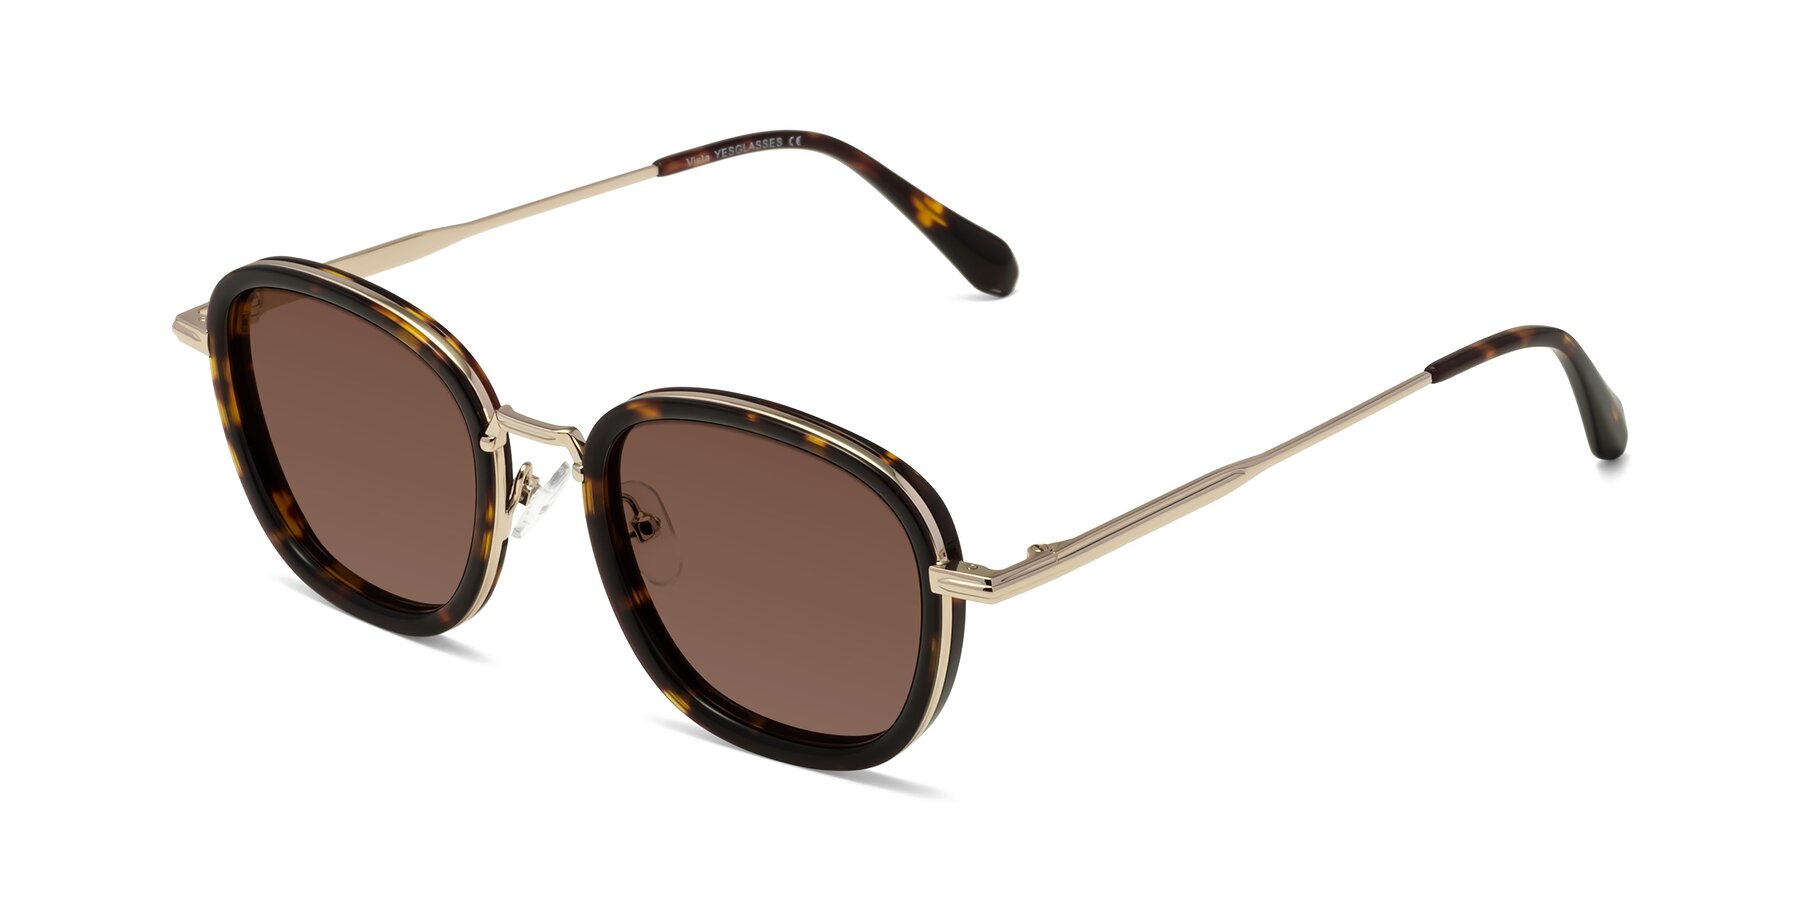 Angle of Vista in Tortoise-Light Gold with Brown Tinted Lenses